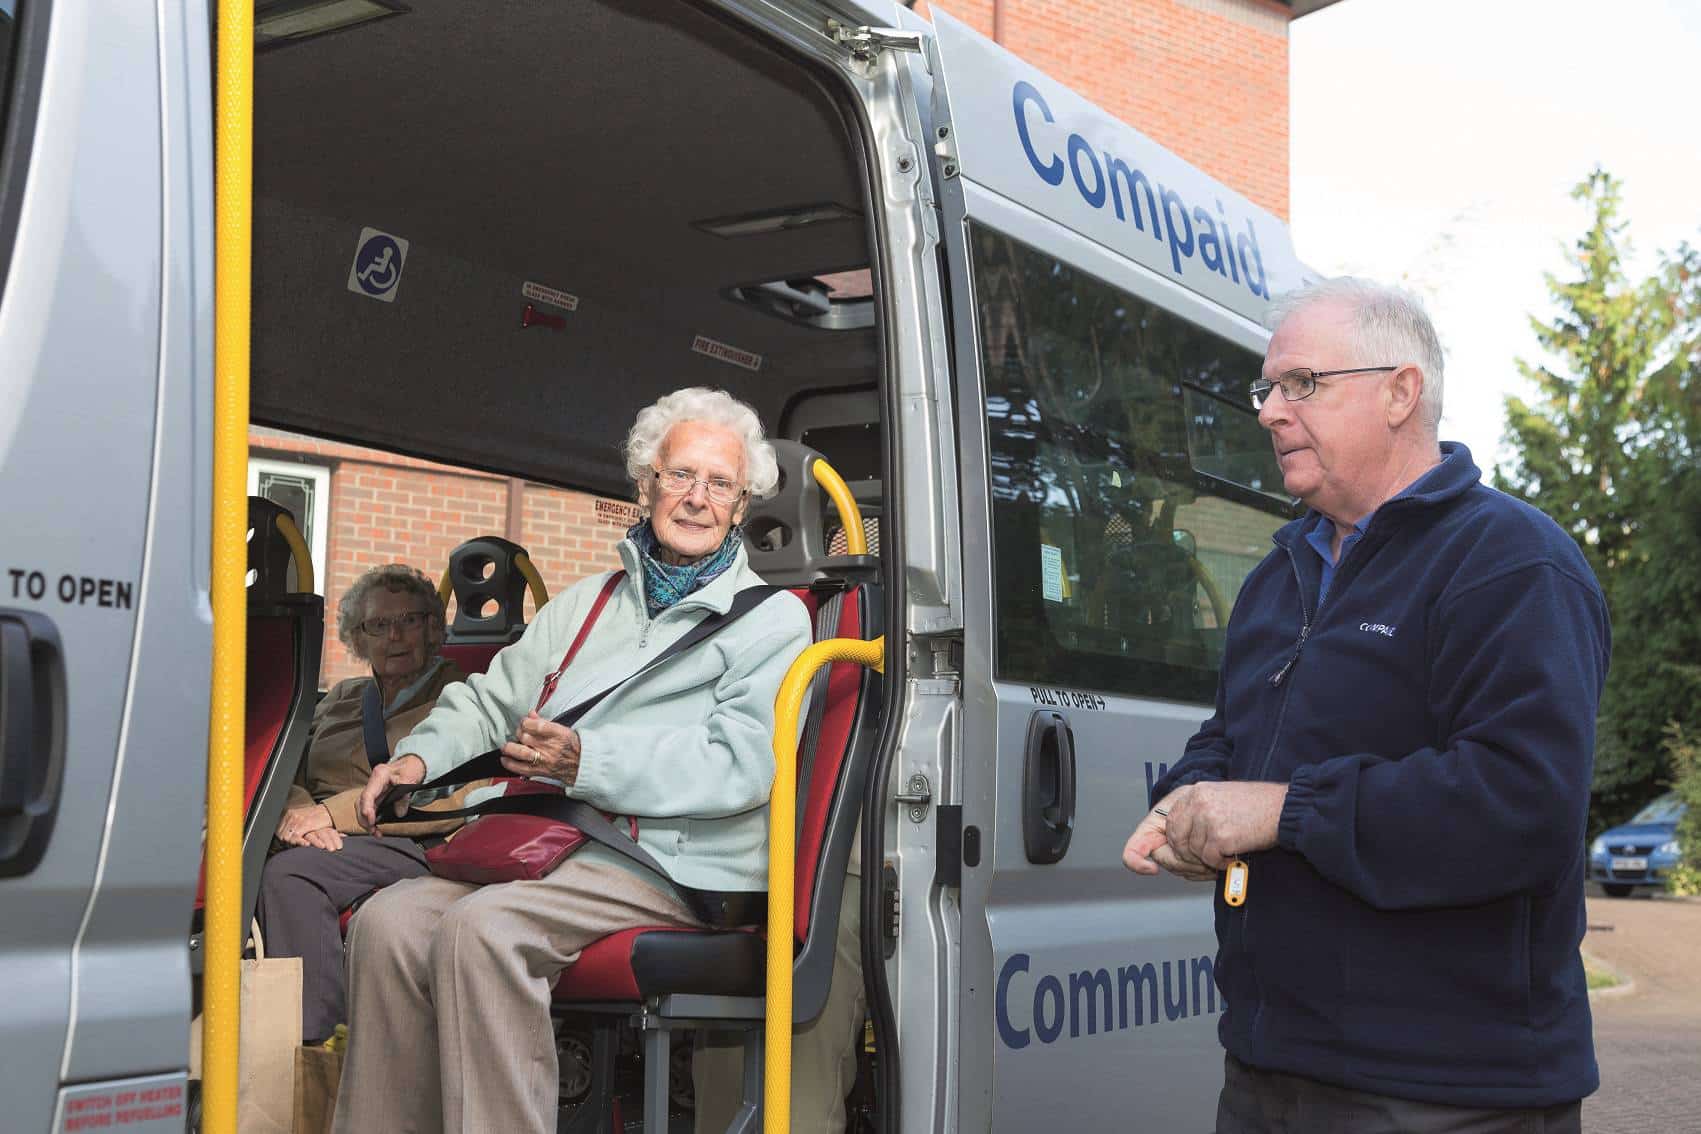 Compaid expands its fleet with help from new enterprise fund